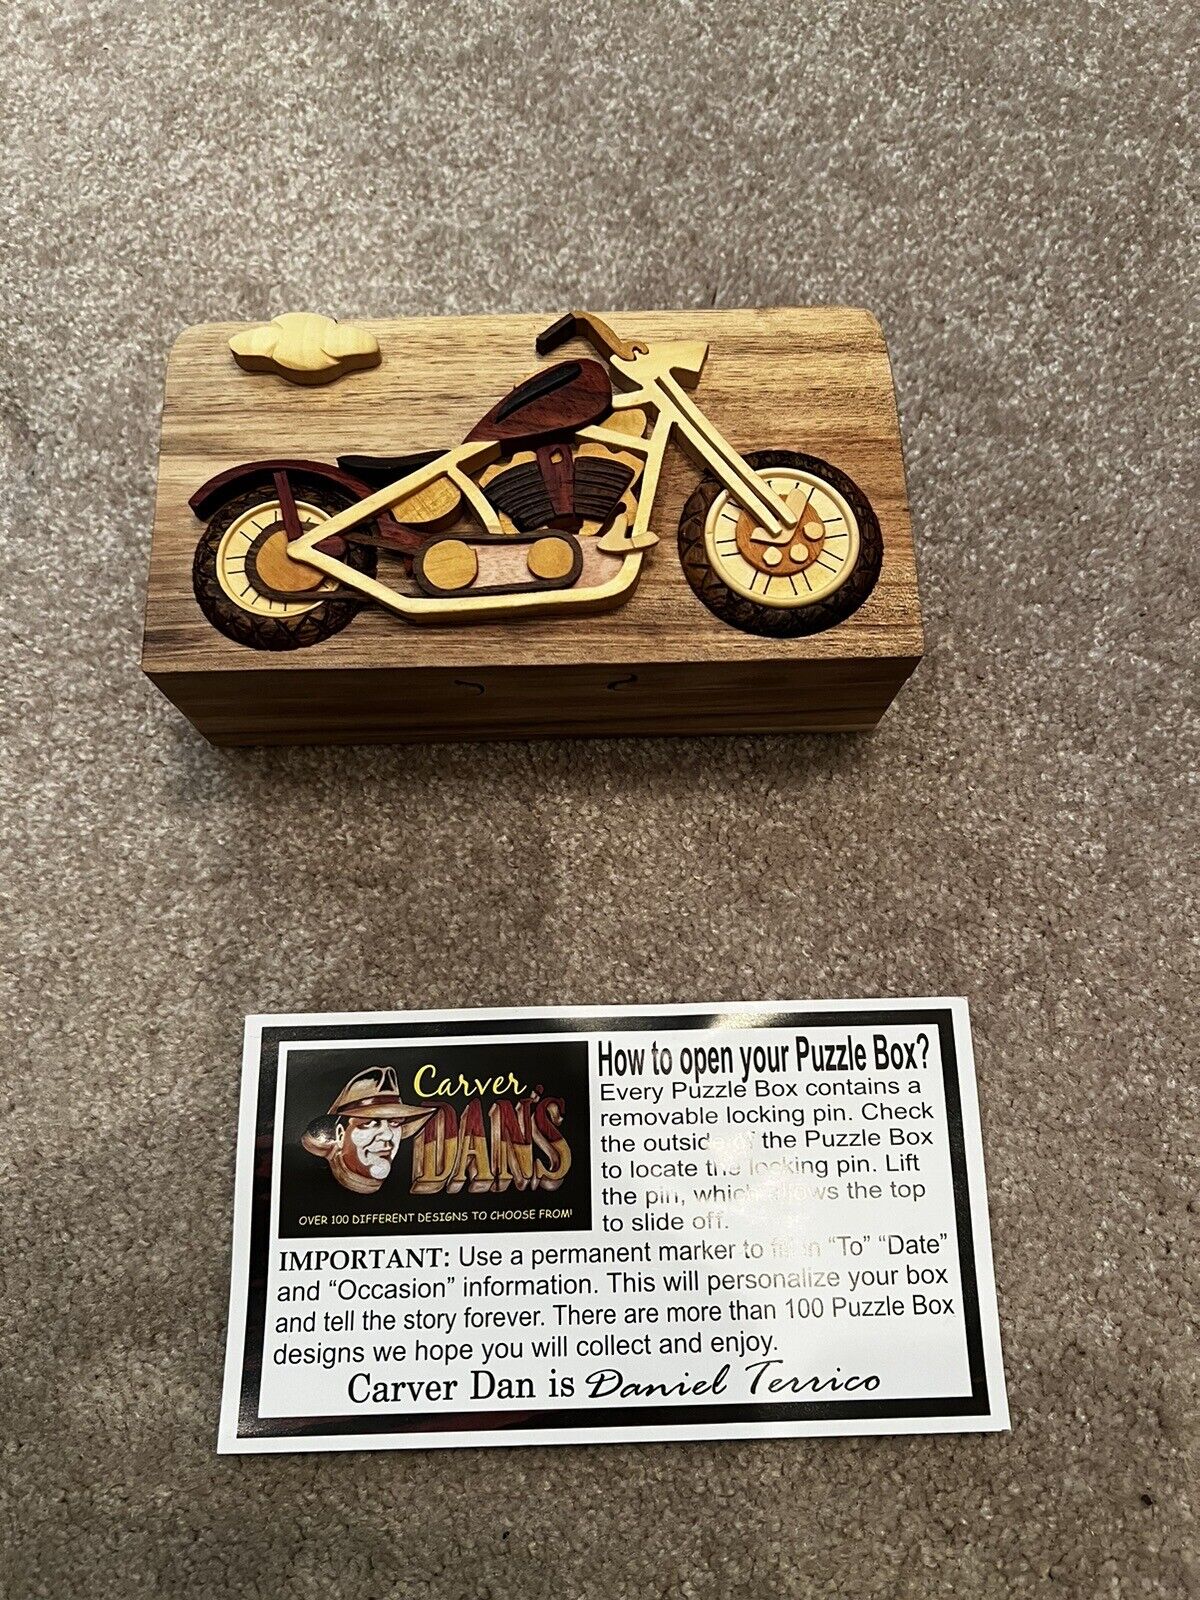 CARVER DAN'S HAND-CARVED Motorcycle WOOD PUZZLE GIFT BOX ~ NEW IN BOX